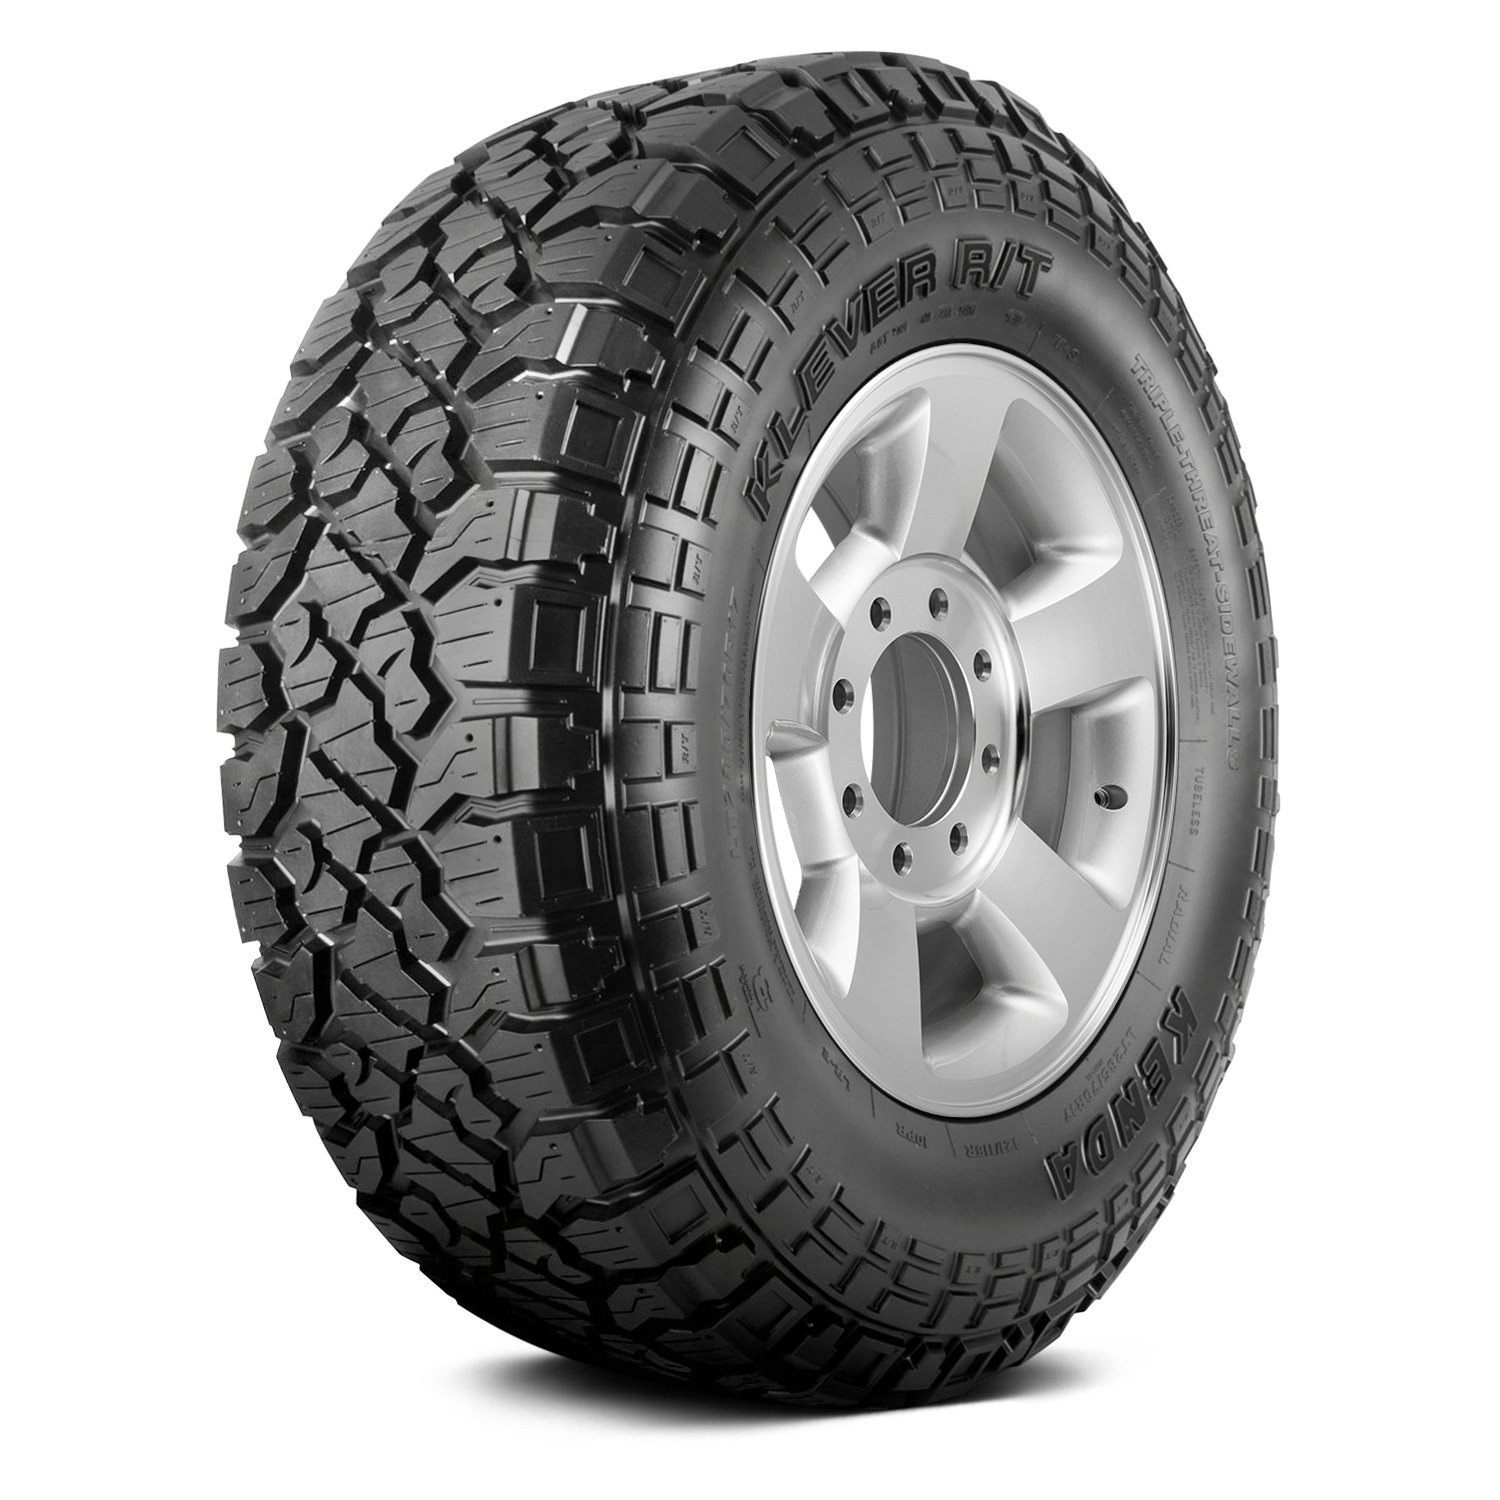 get-rugged-off-road-performance-with-kenda-tires-on-jeep-cherokee-forum